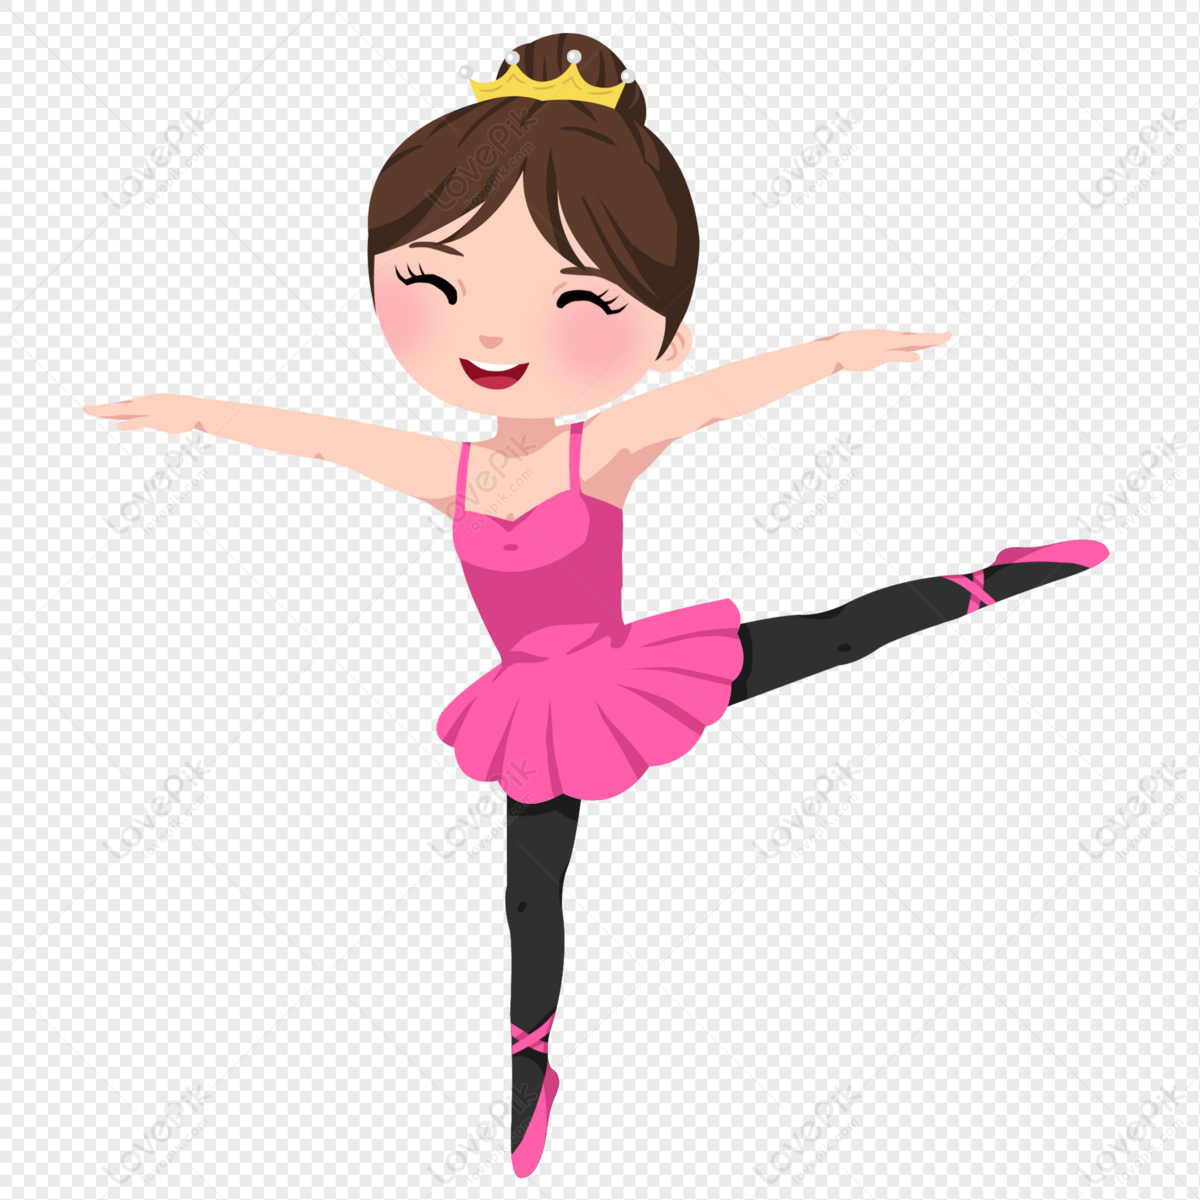 Cartoon Dancing Girl PNG Transparent And Clipart Image For Free Download -  Lovepik | 401480186